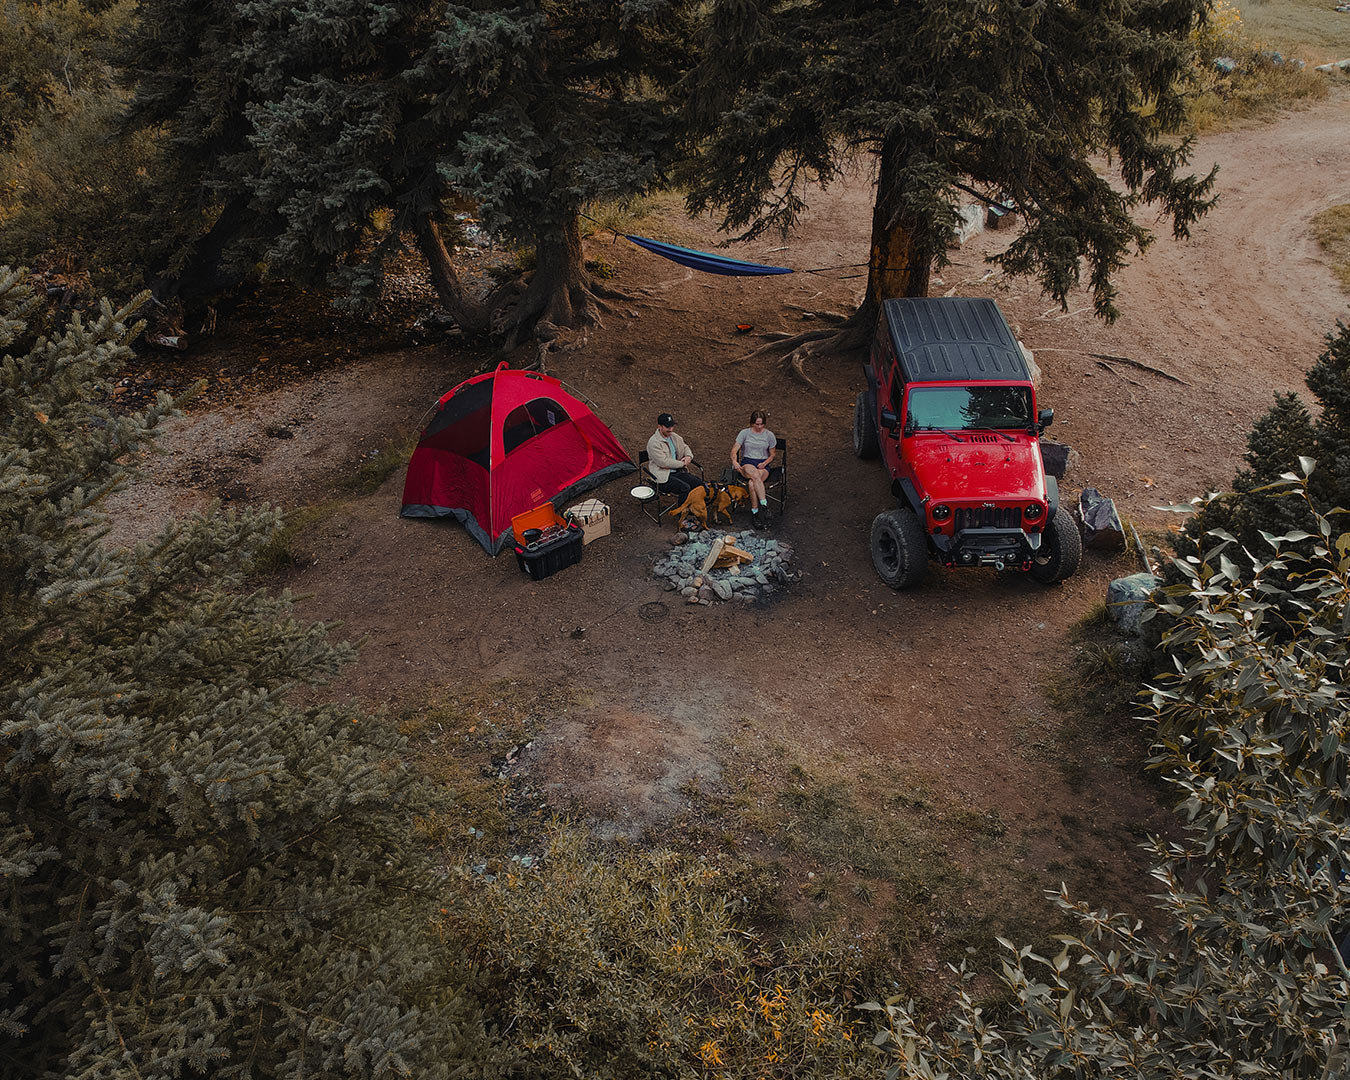 Bird view of a camping site with red jeep